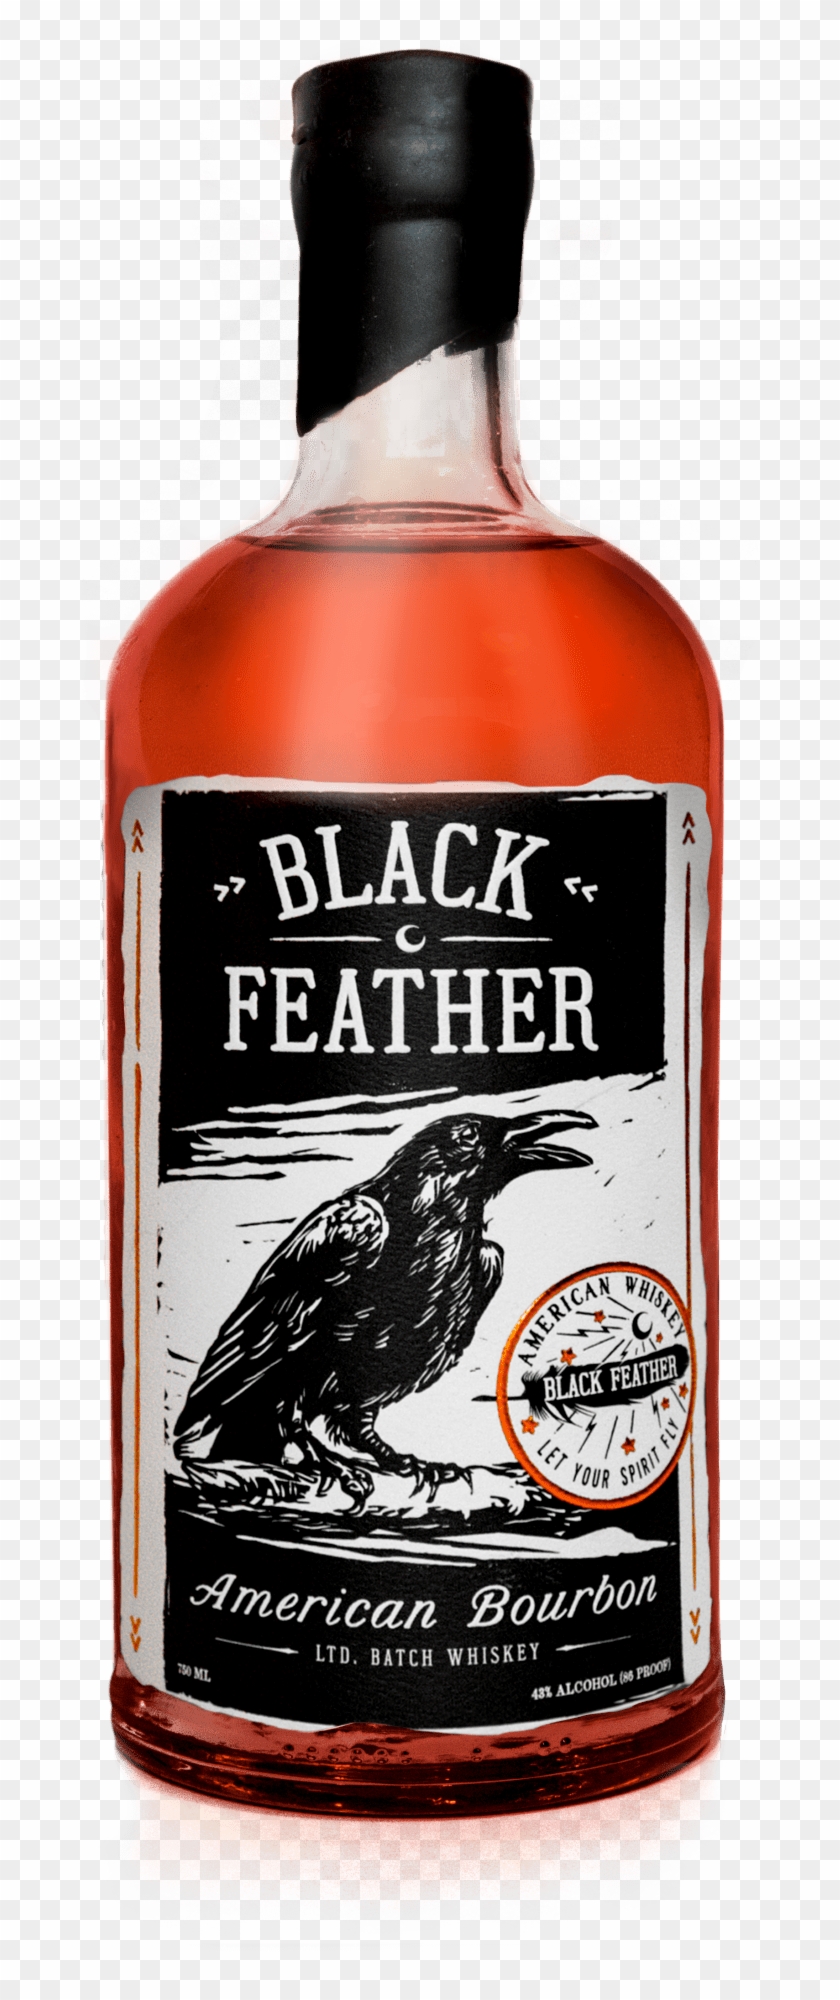 Black Feather Bourbon Whiskey Clipart #4233209